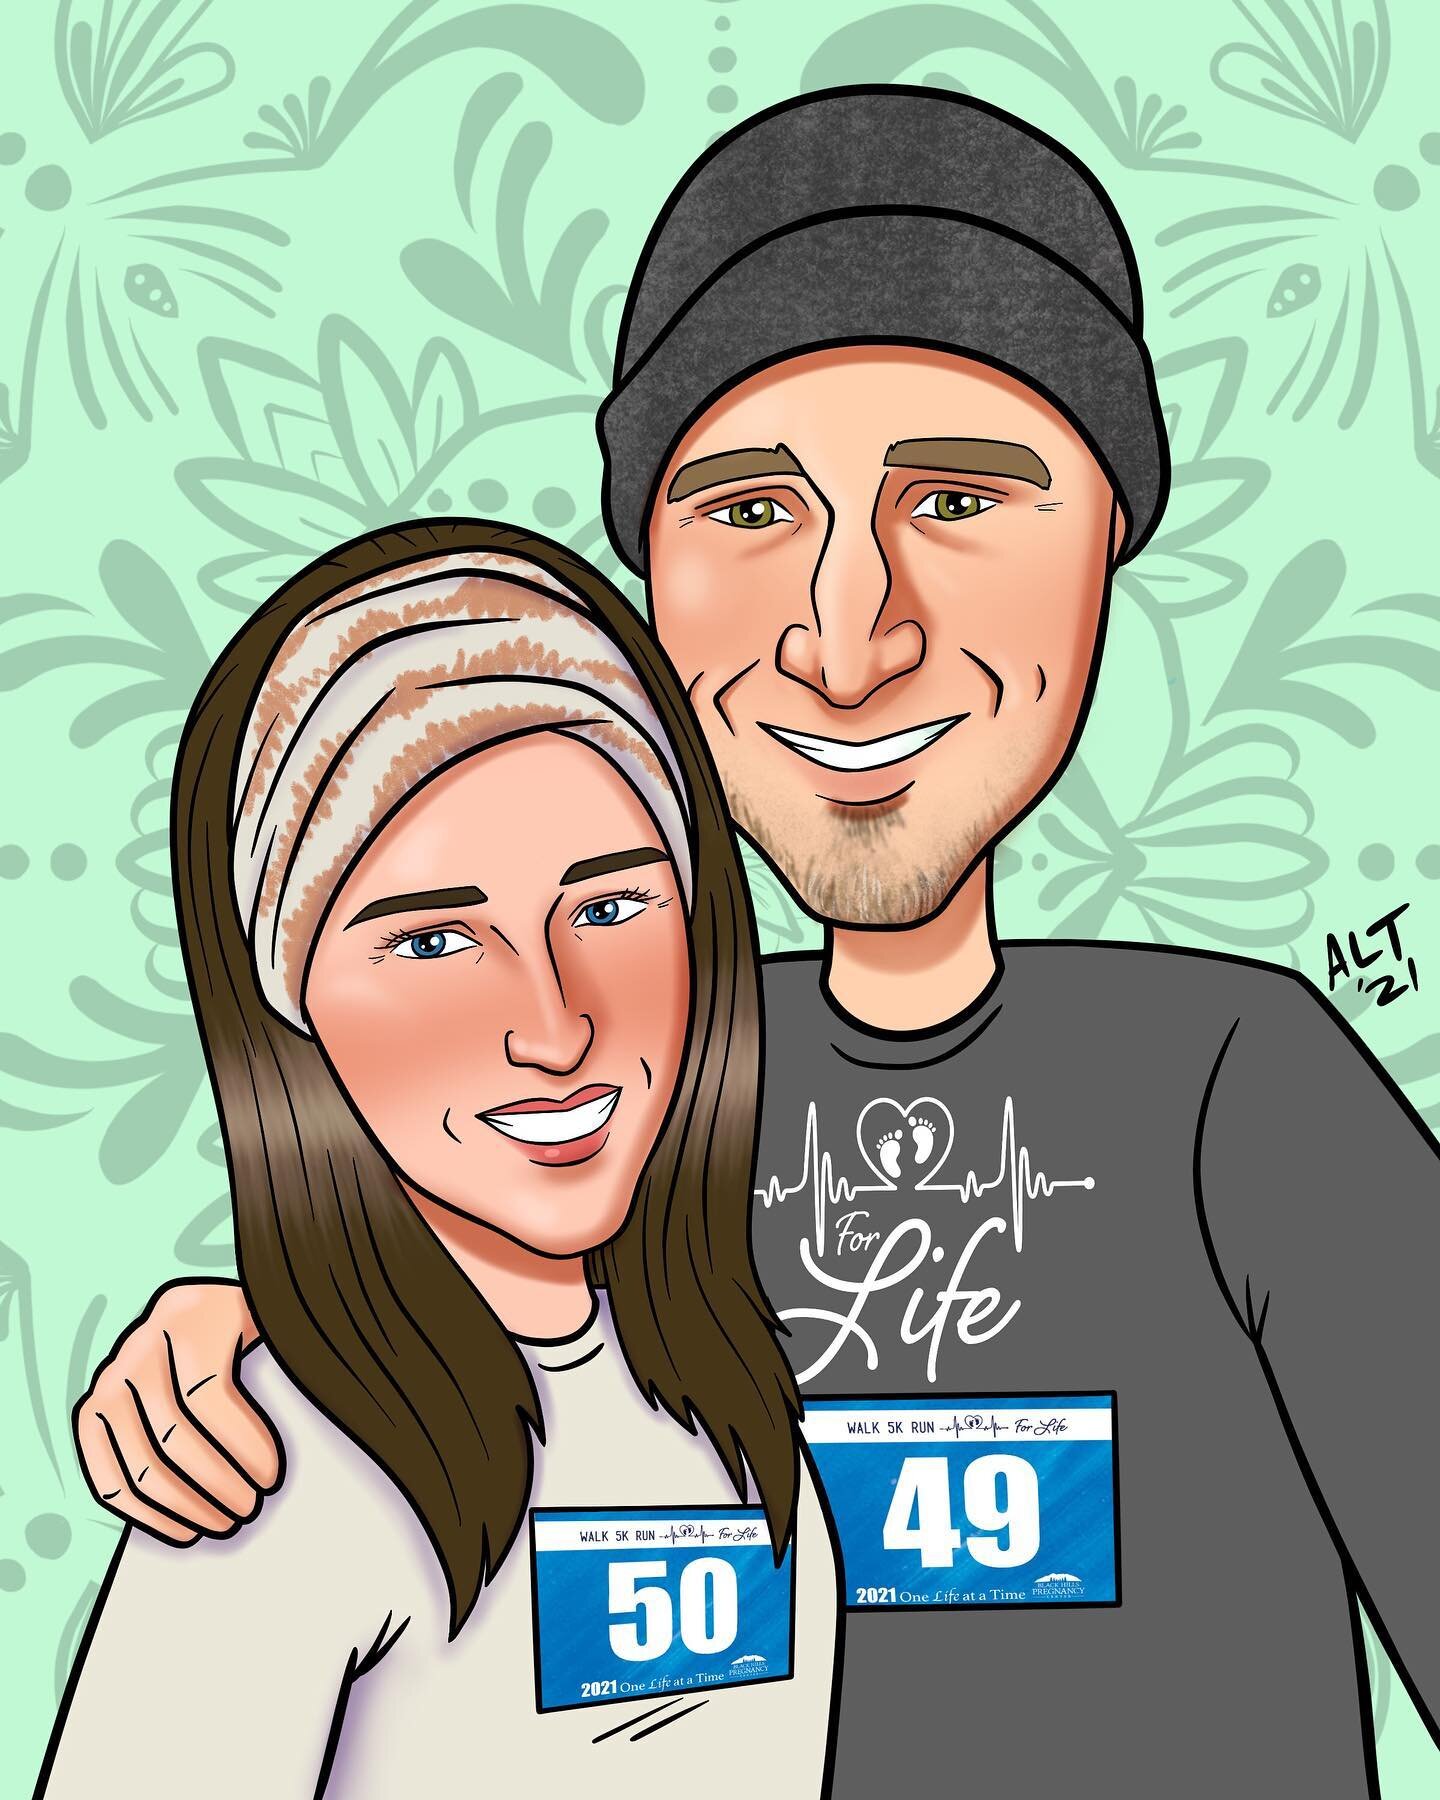 This couple loves participating in walks for charity! They got their caricature portraits from one of their favorite walks early this year. Way to make a difference! 😇💪💕